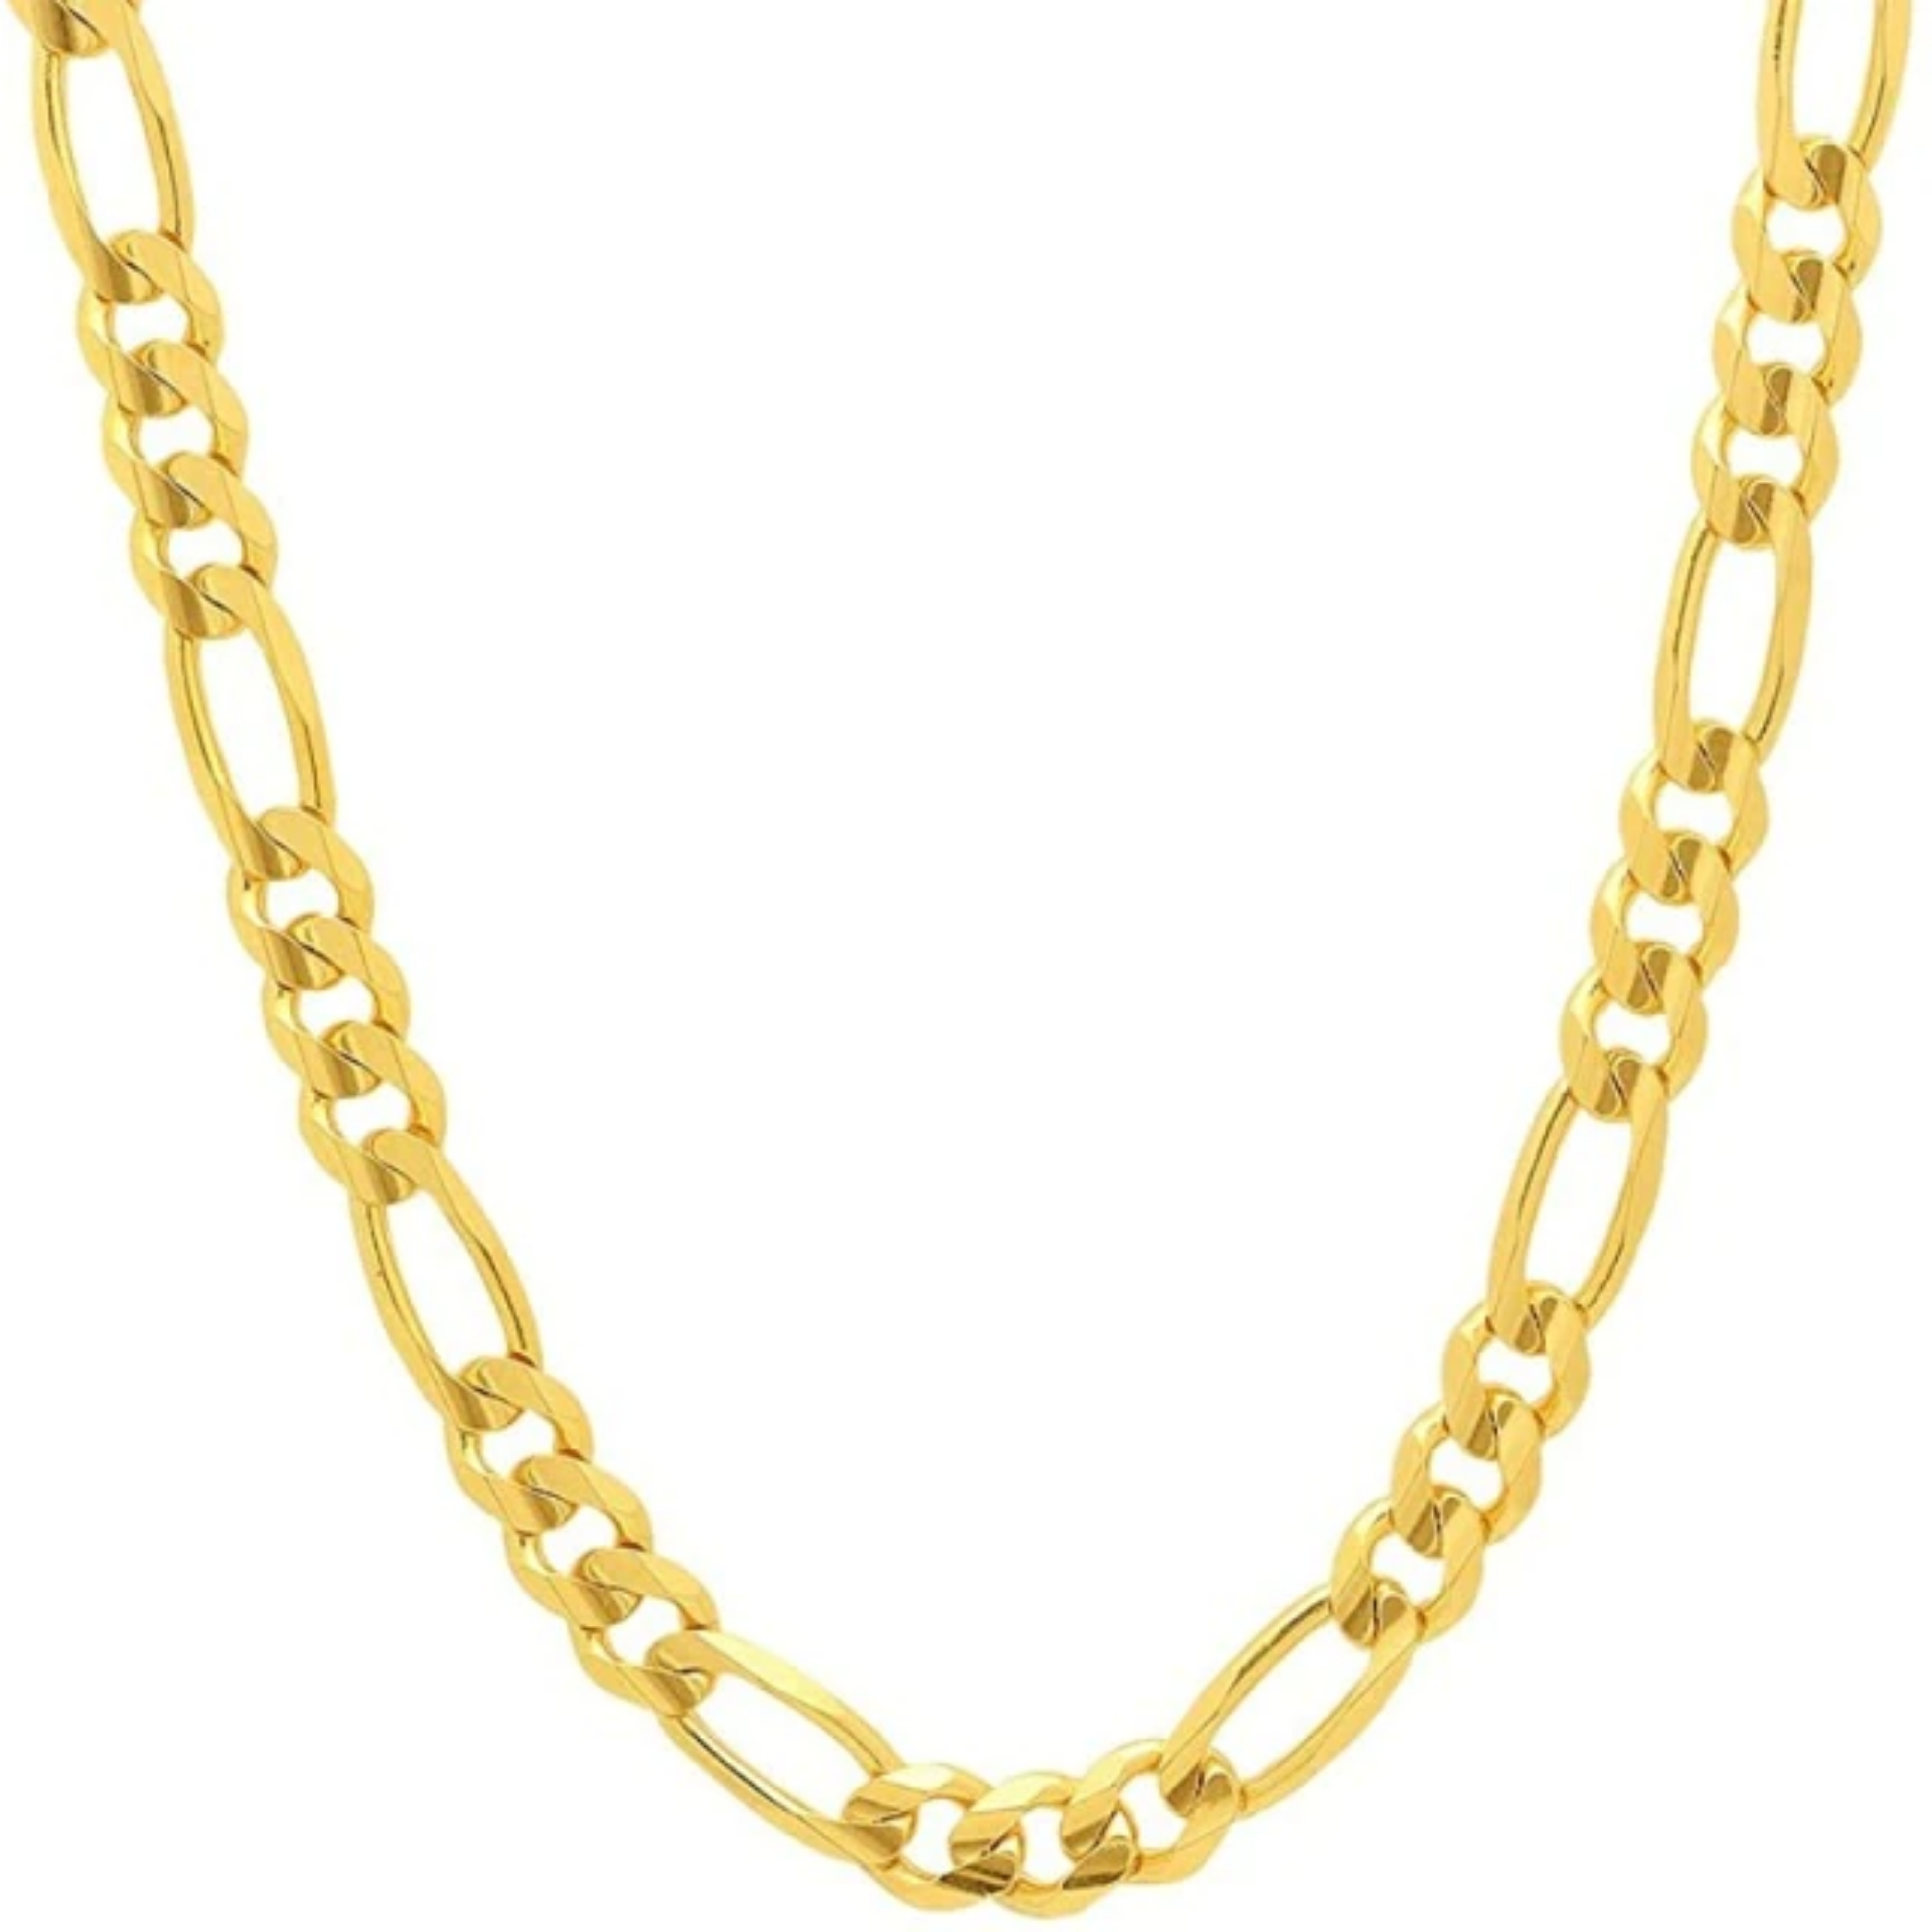 Infinique Creations - 18K Gold Plated Stainless Steel Figaro Chain Bracelet Necklace 7-38" 3-12mm